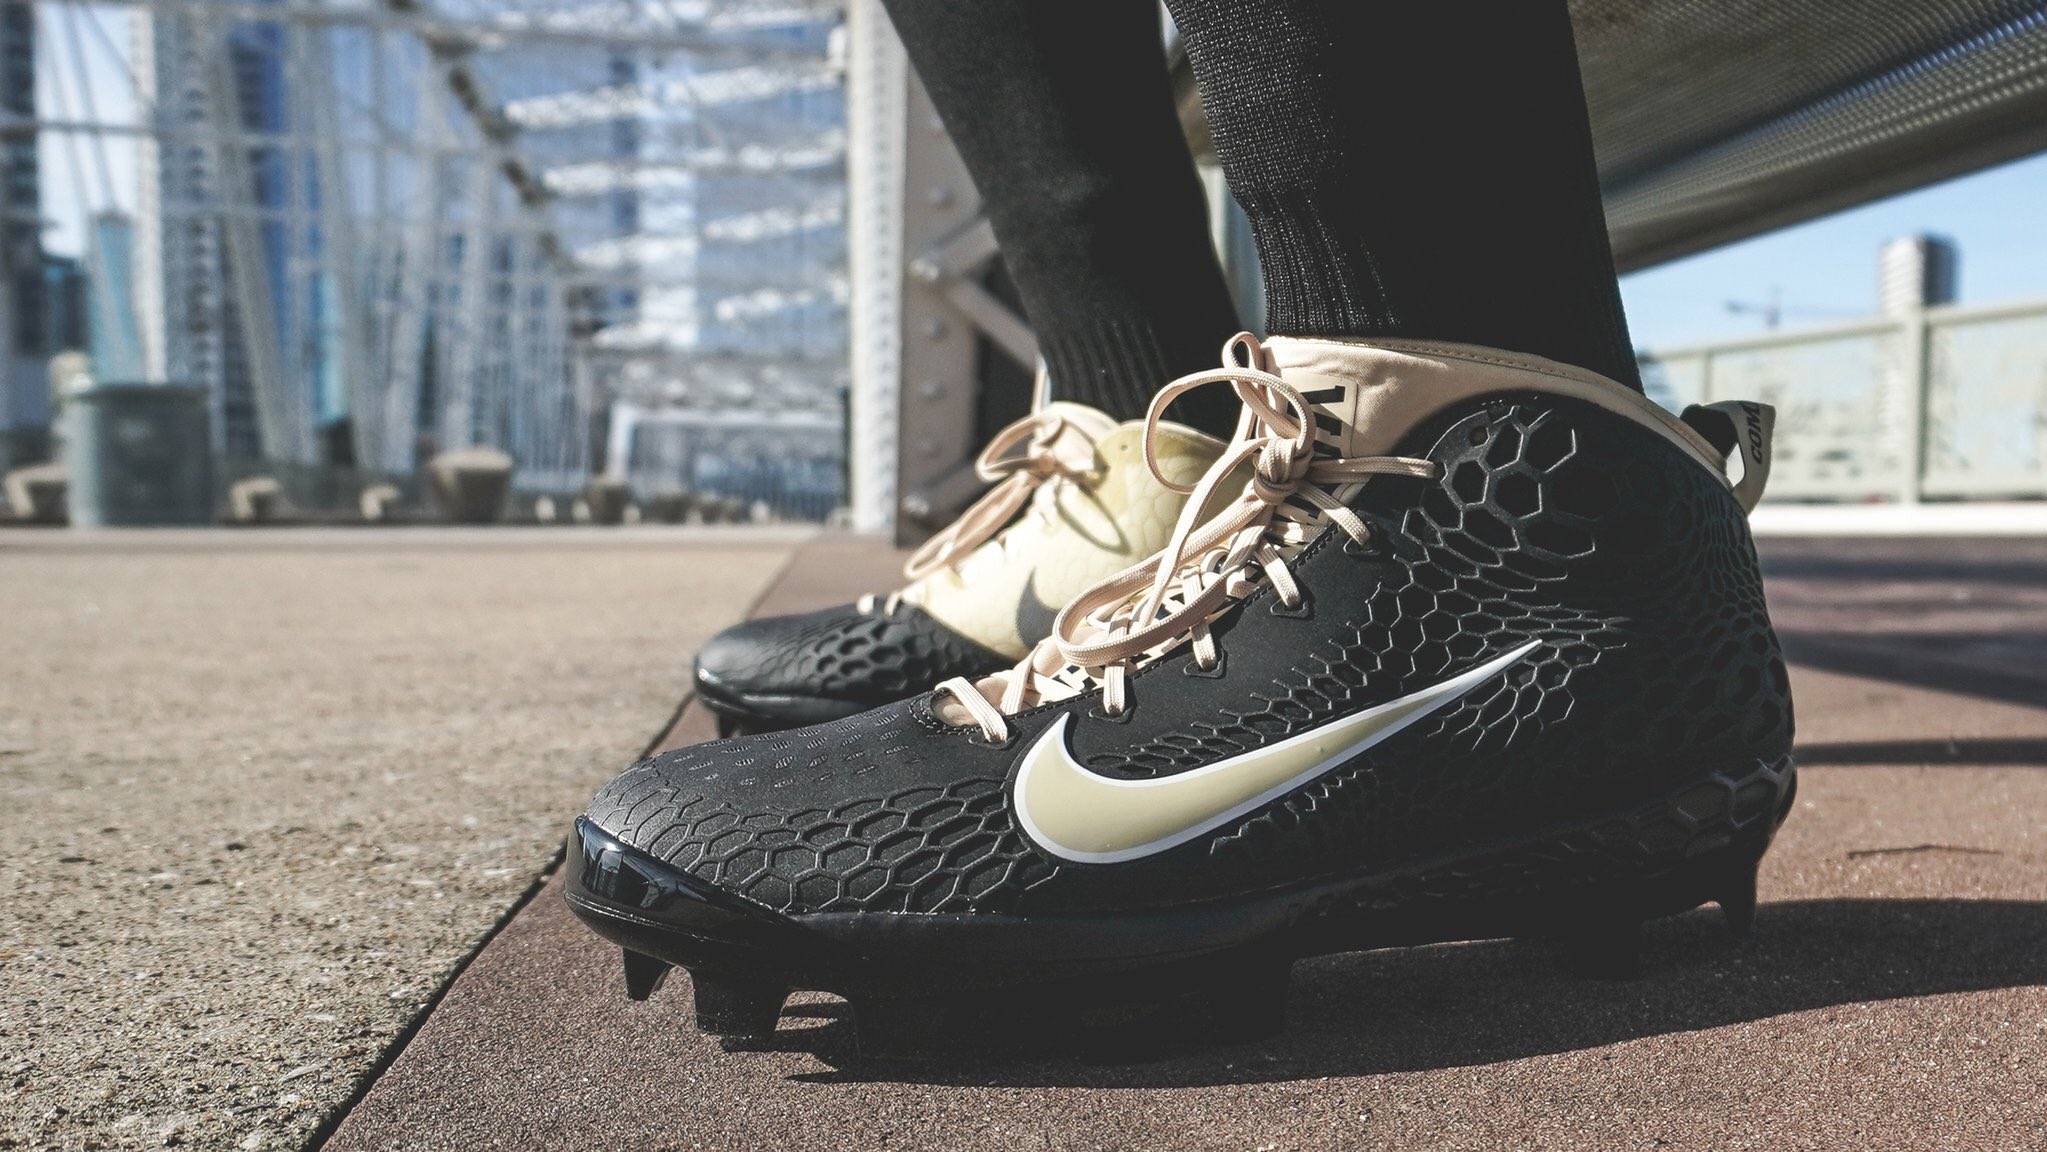 Baseball Bros on X: Vandy's new Nike Force Zoom Trout 5 cleats